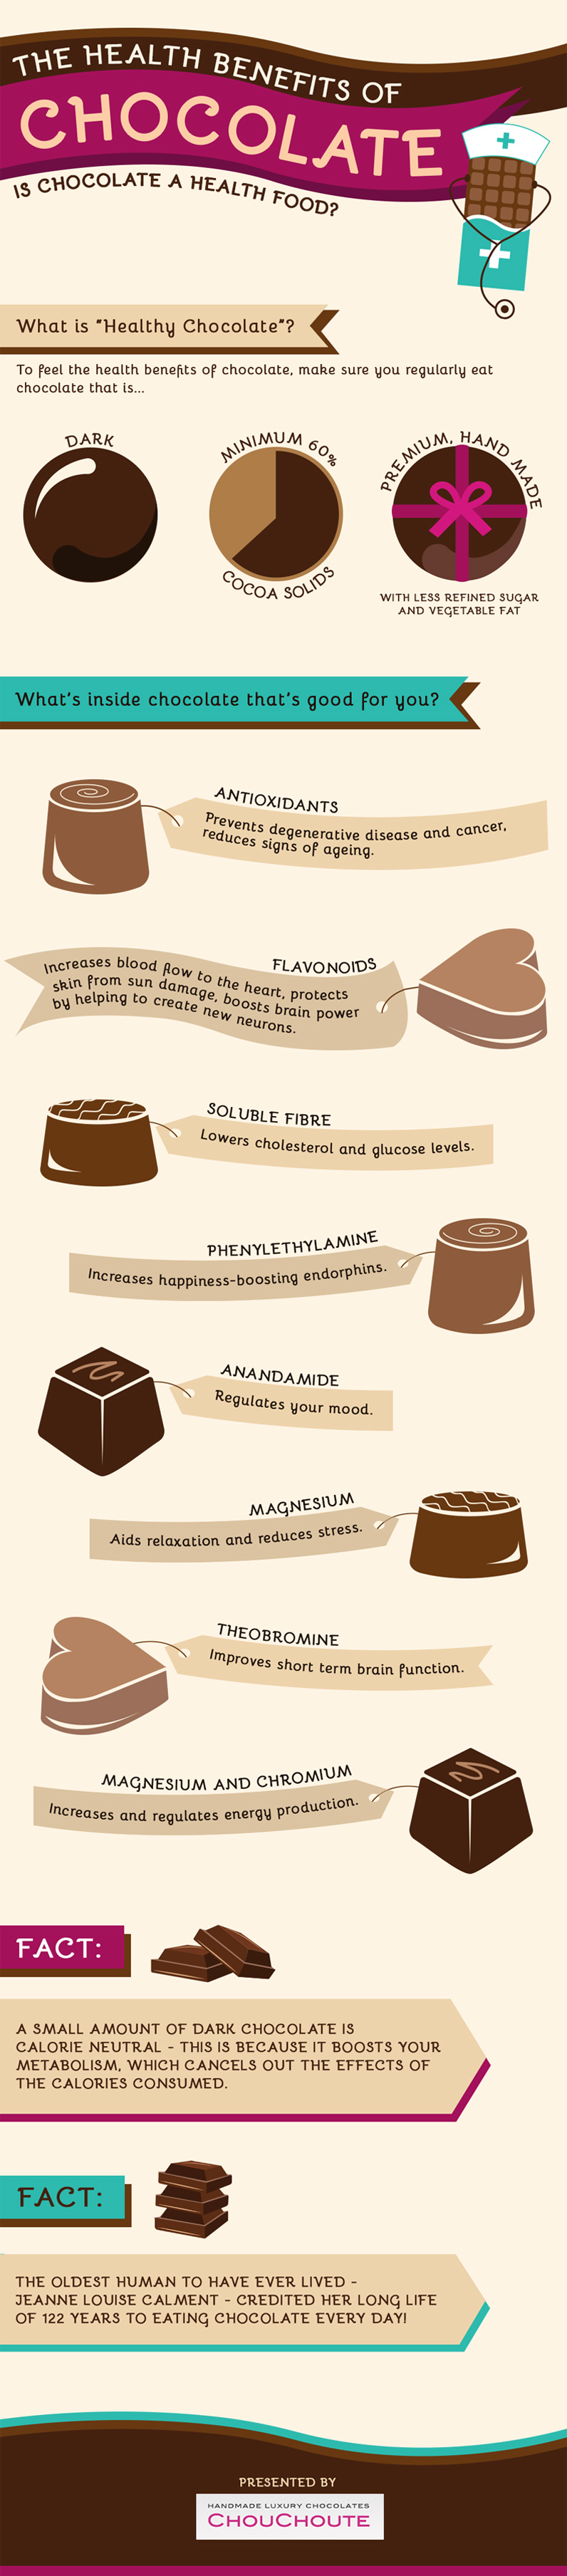 The Health Benefits Of Chocolate #infographic